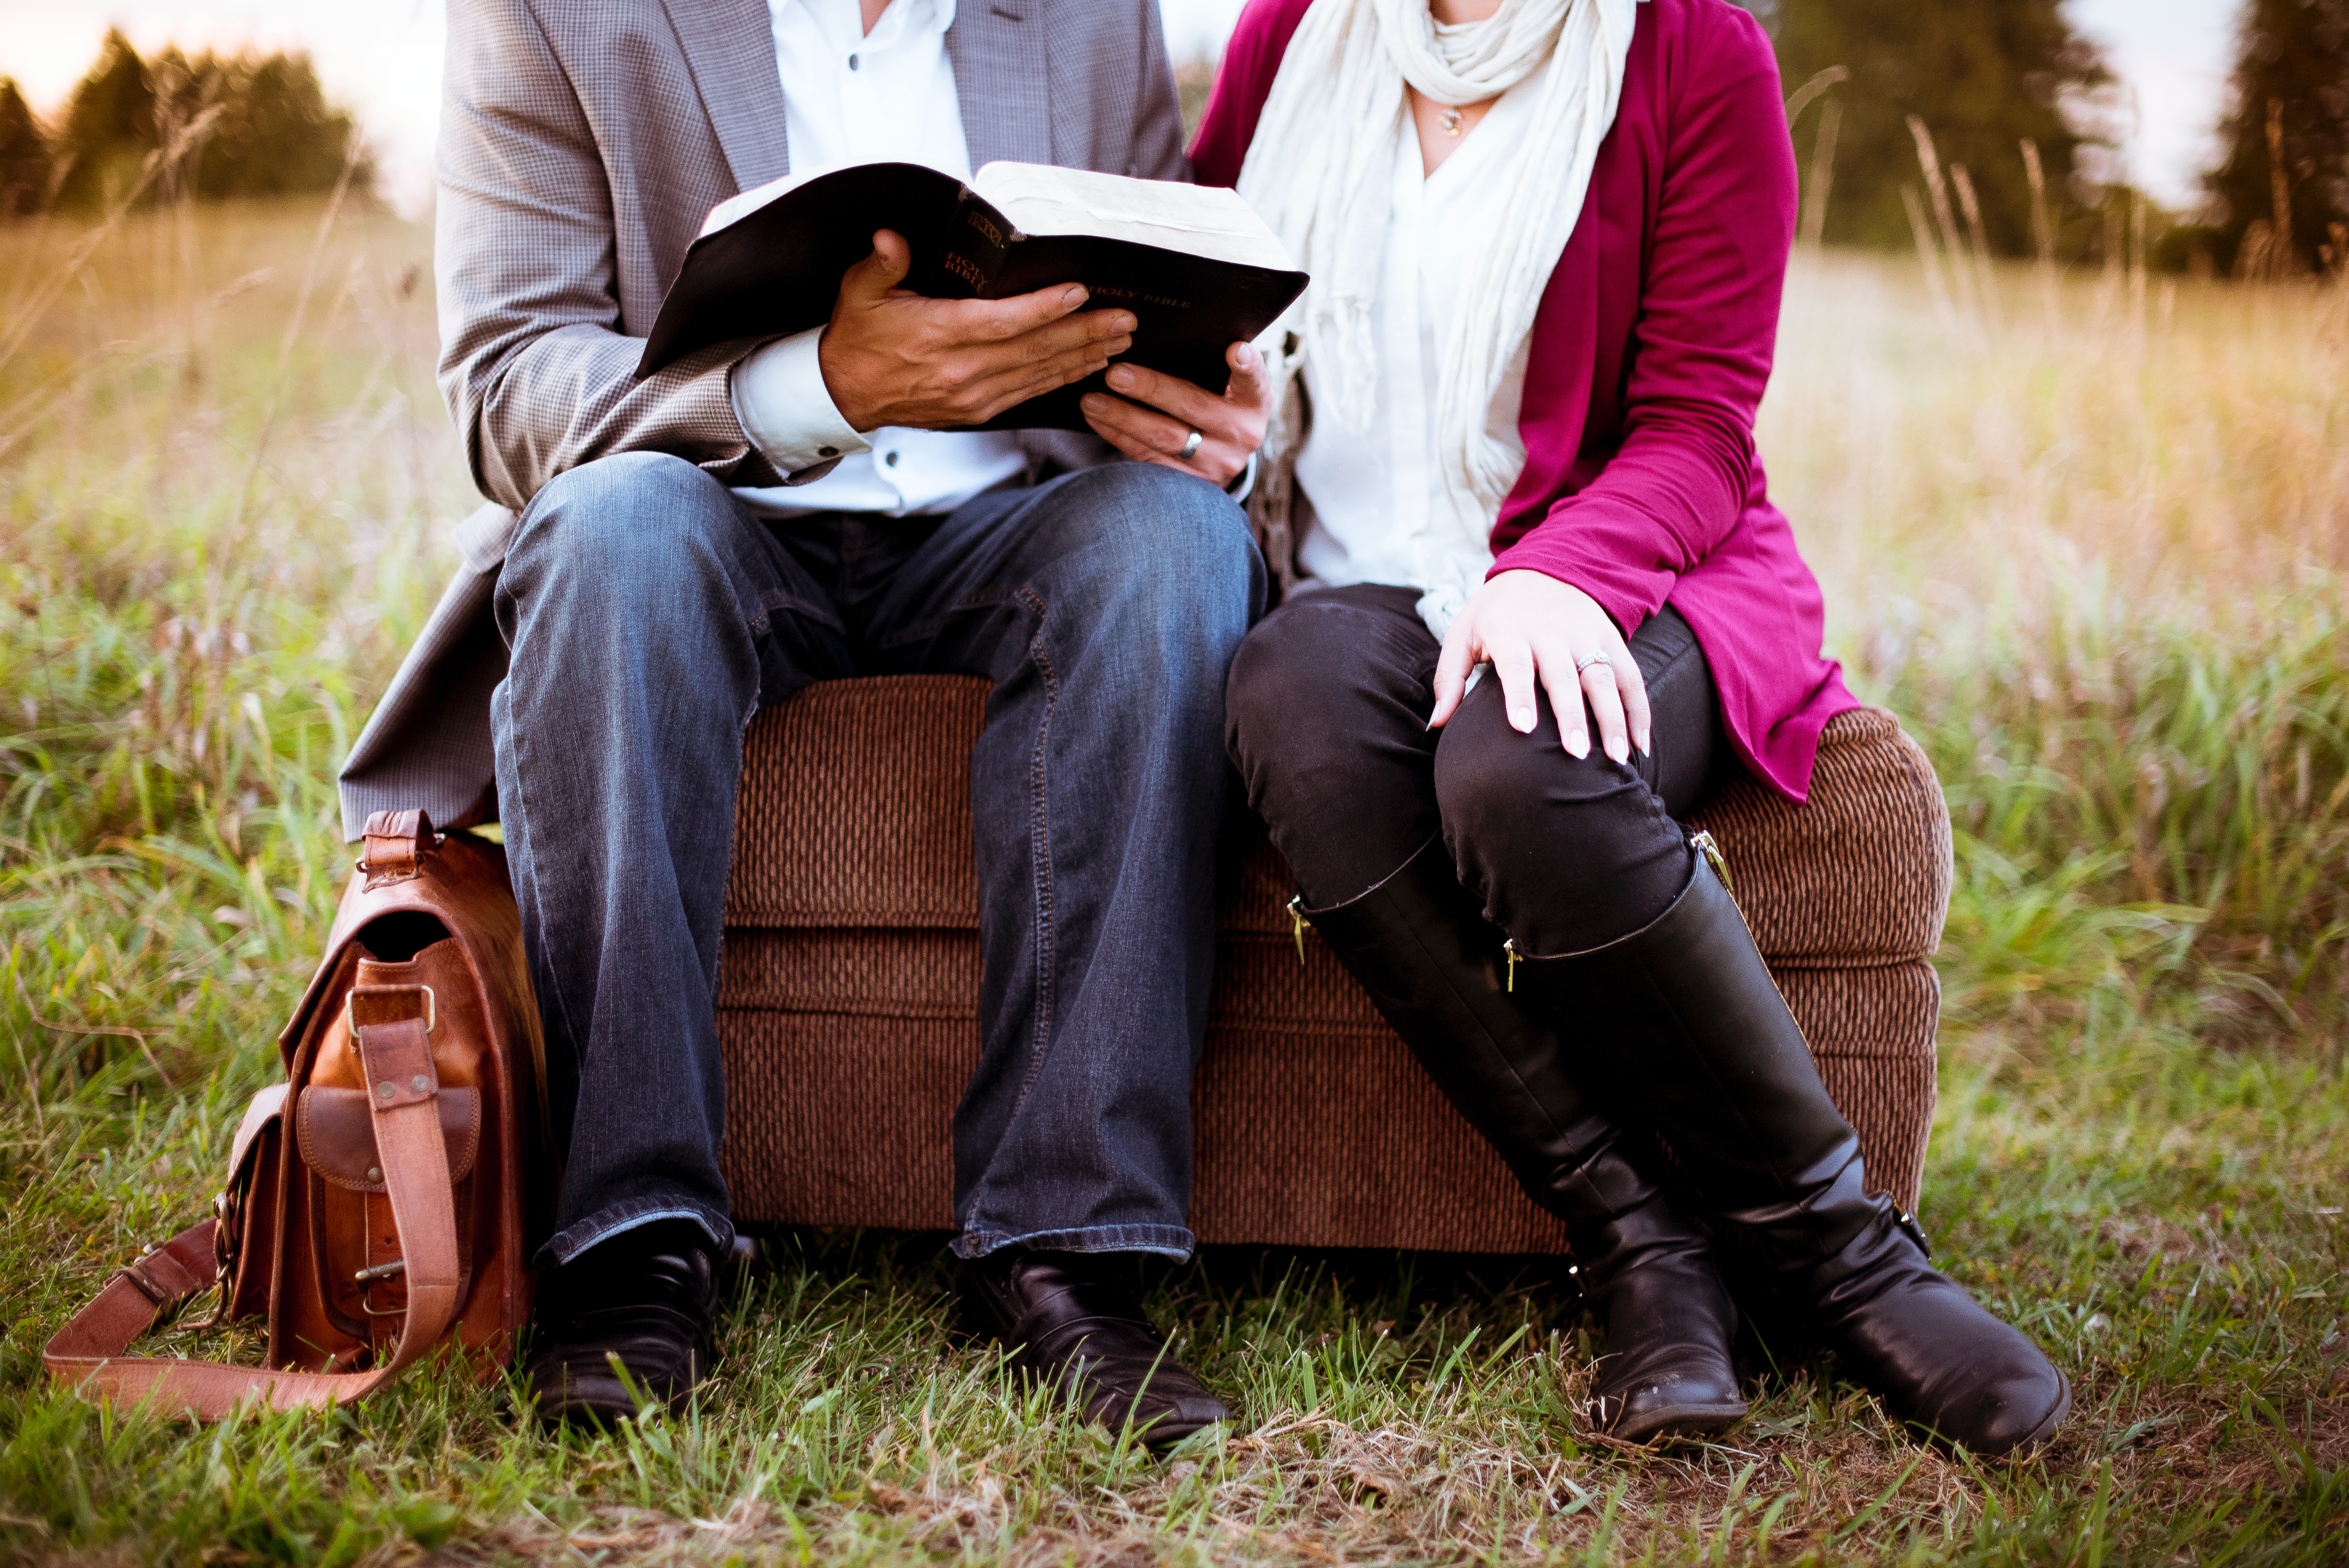 husband and wife reading the bible on an ottoman together